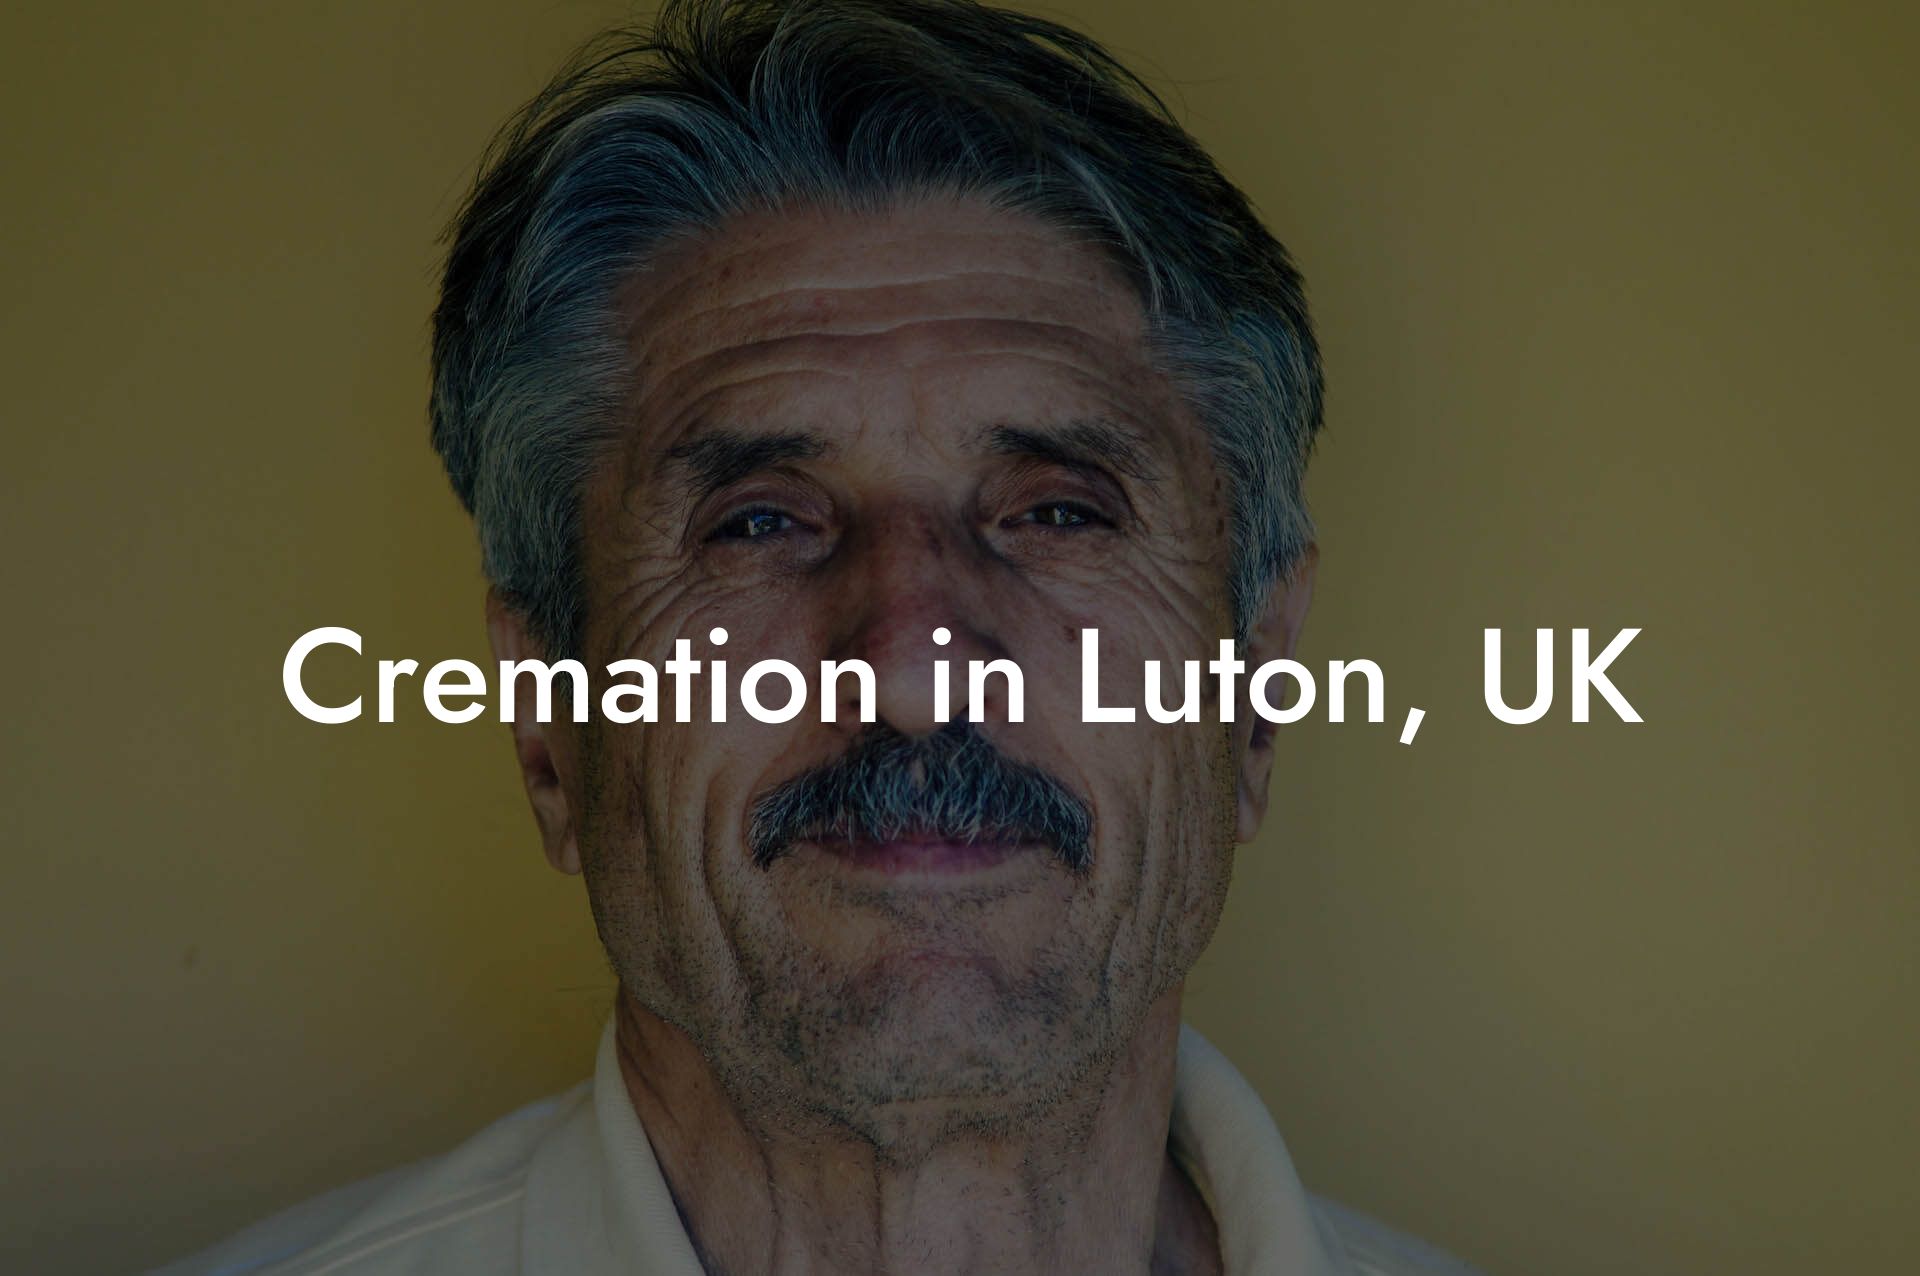 Cremation in Luton, UK